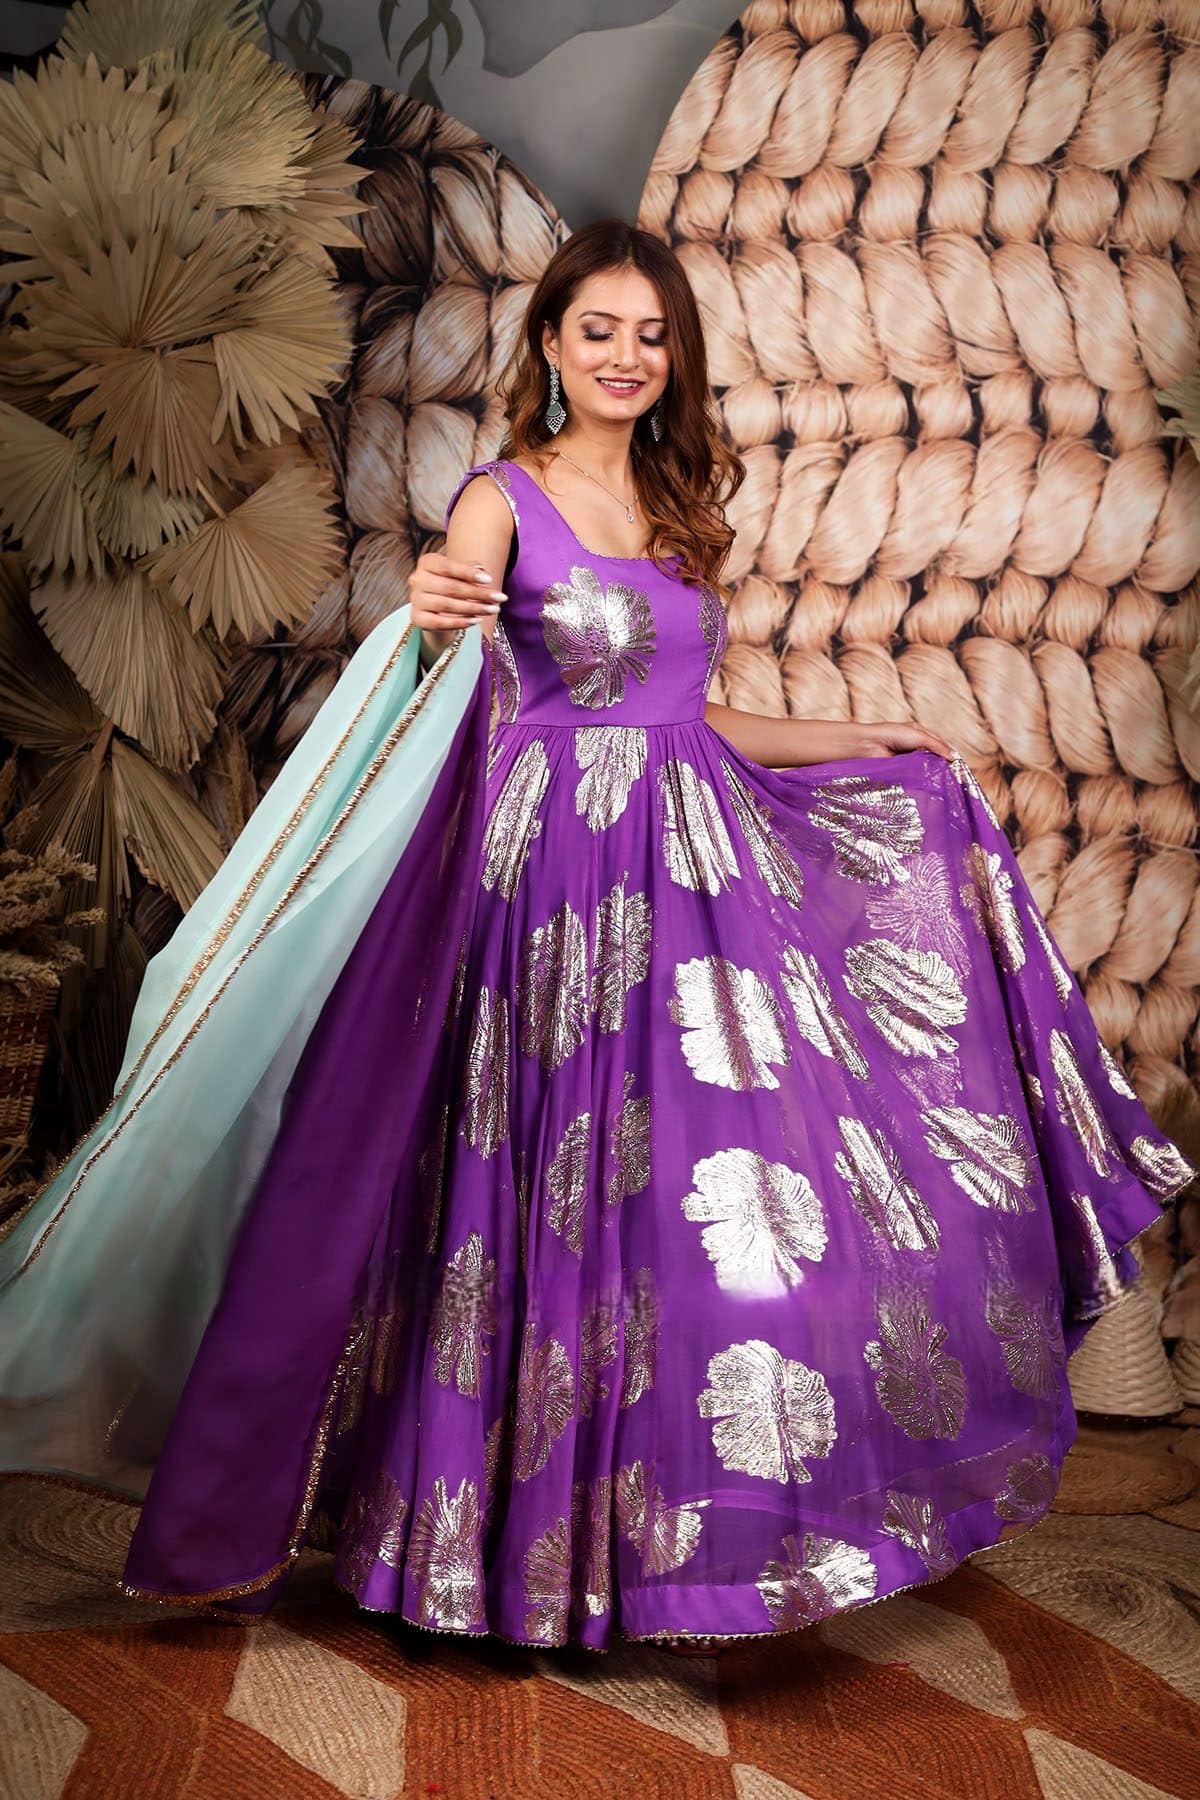 Lilac Stunning Anarkali Long Partywear Gown with Dupatta in Jacquard Georgette fabric latest design SLEEVELESS 56 inches long Perfect dress